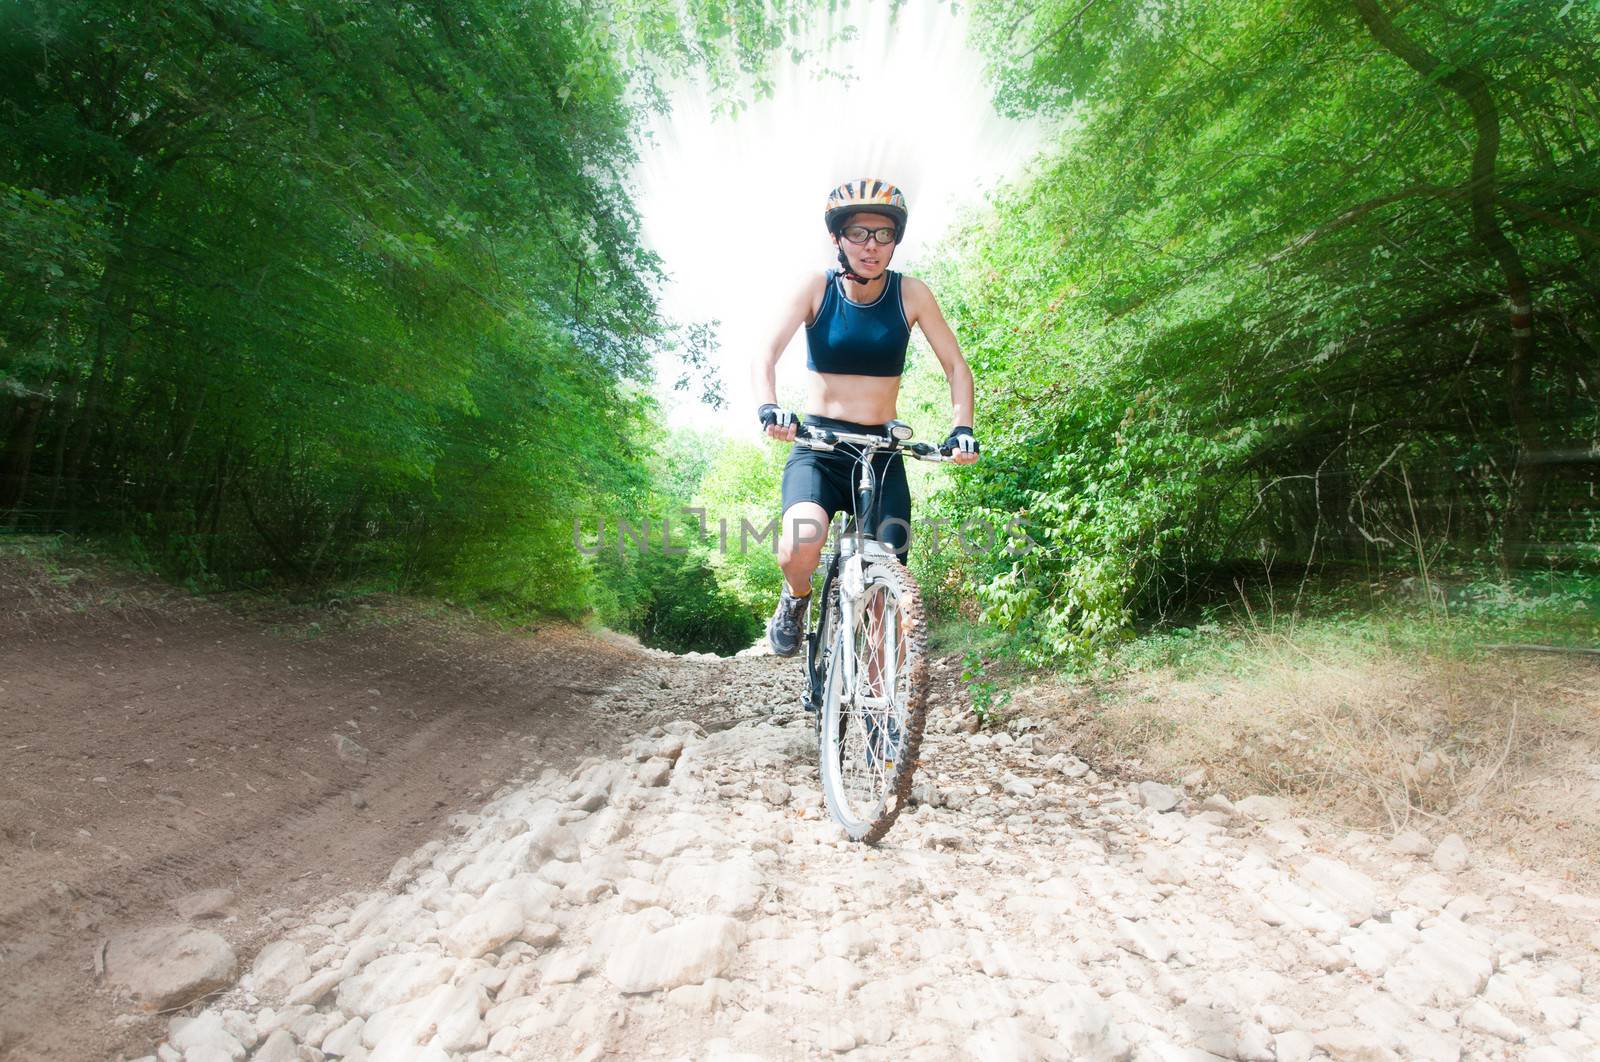 Cyclist rides through the forest with blur background